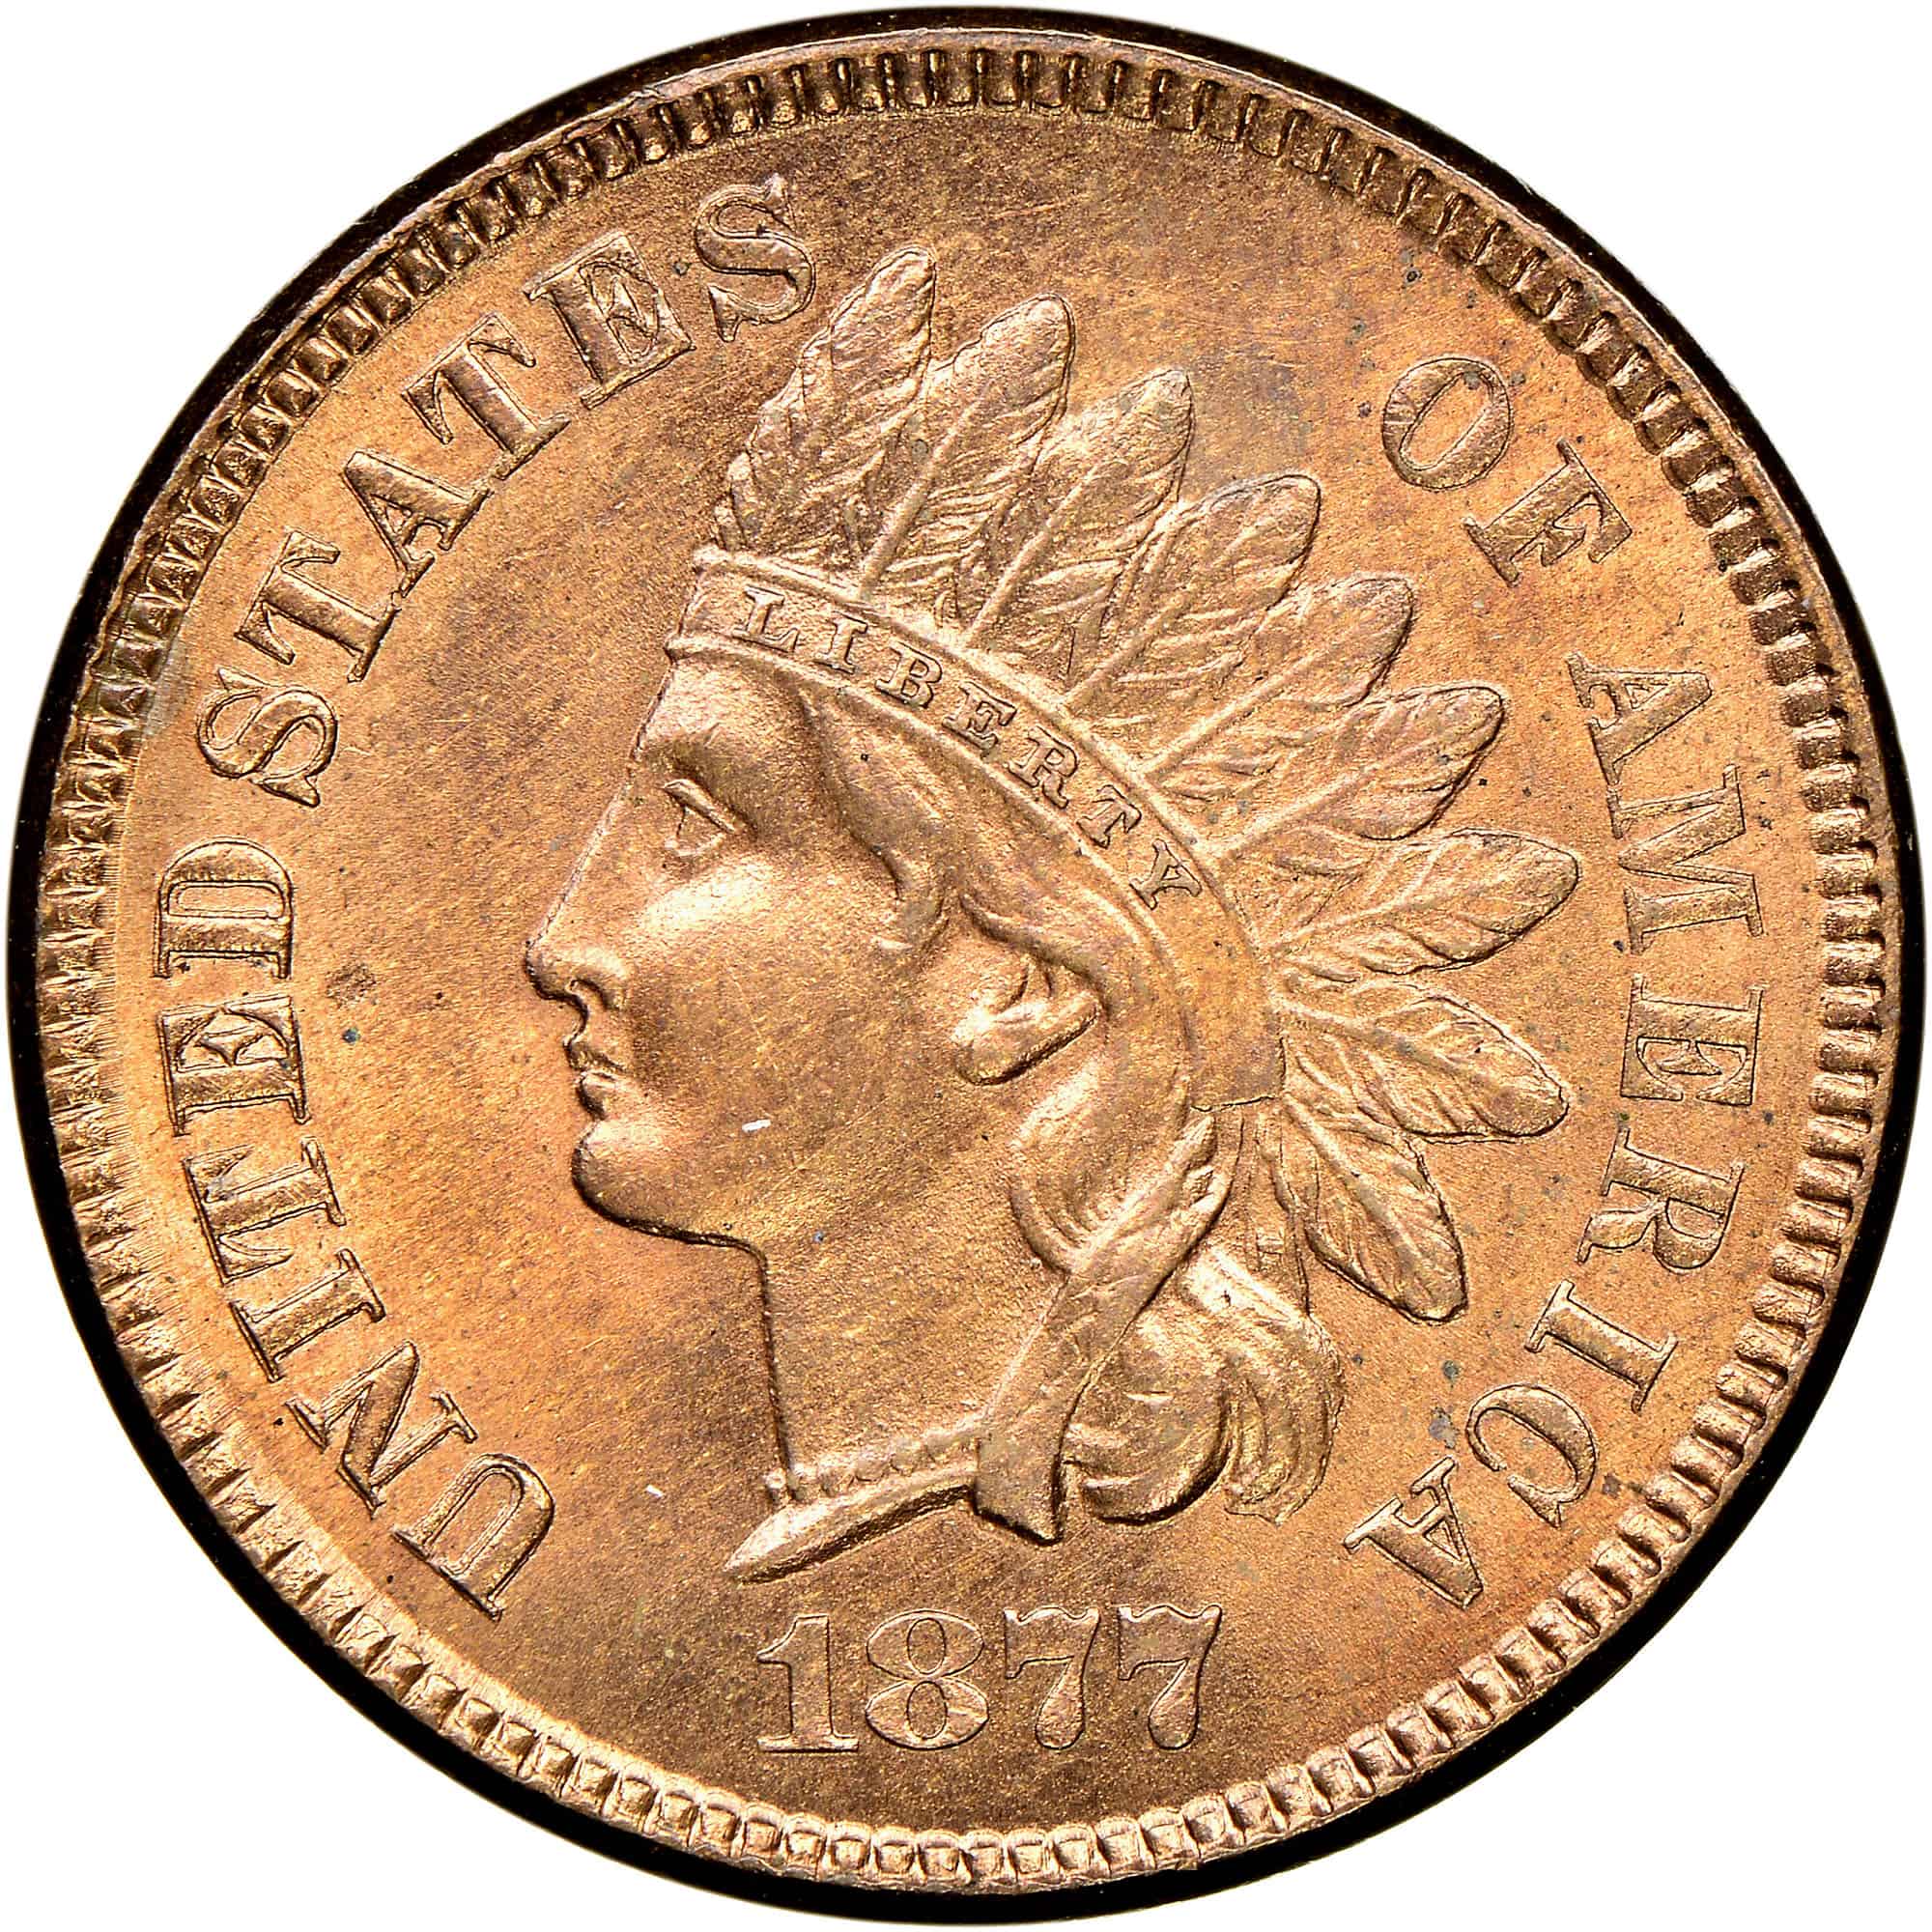 The Obverse of the 1877 Indian Head Penny